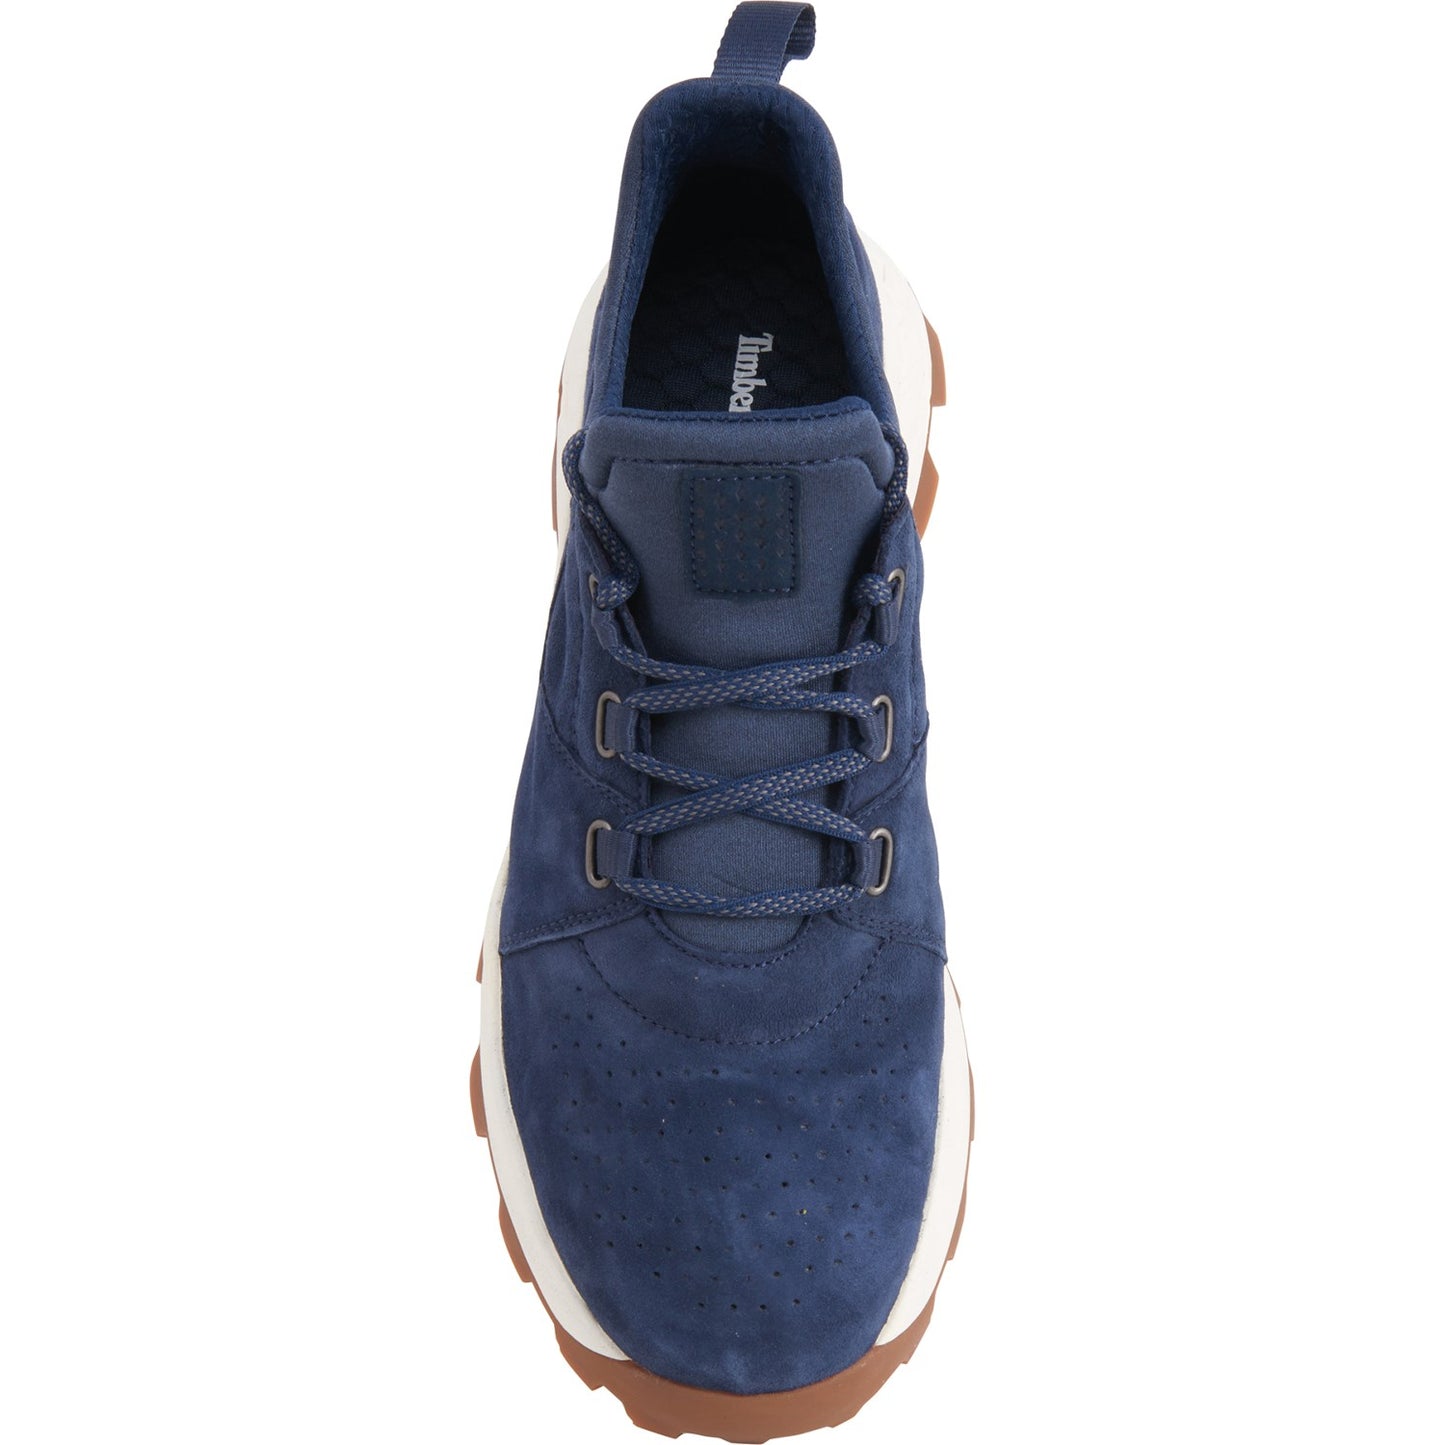 Timberland Brooklyn Oxford Suede Comfort Shoes Sneakers